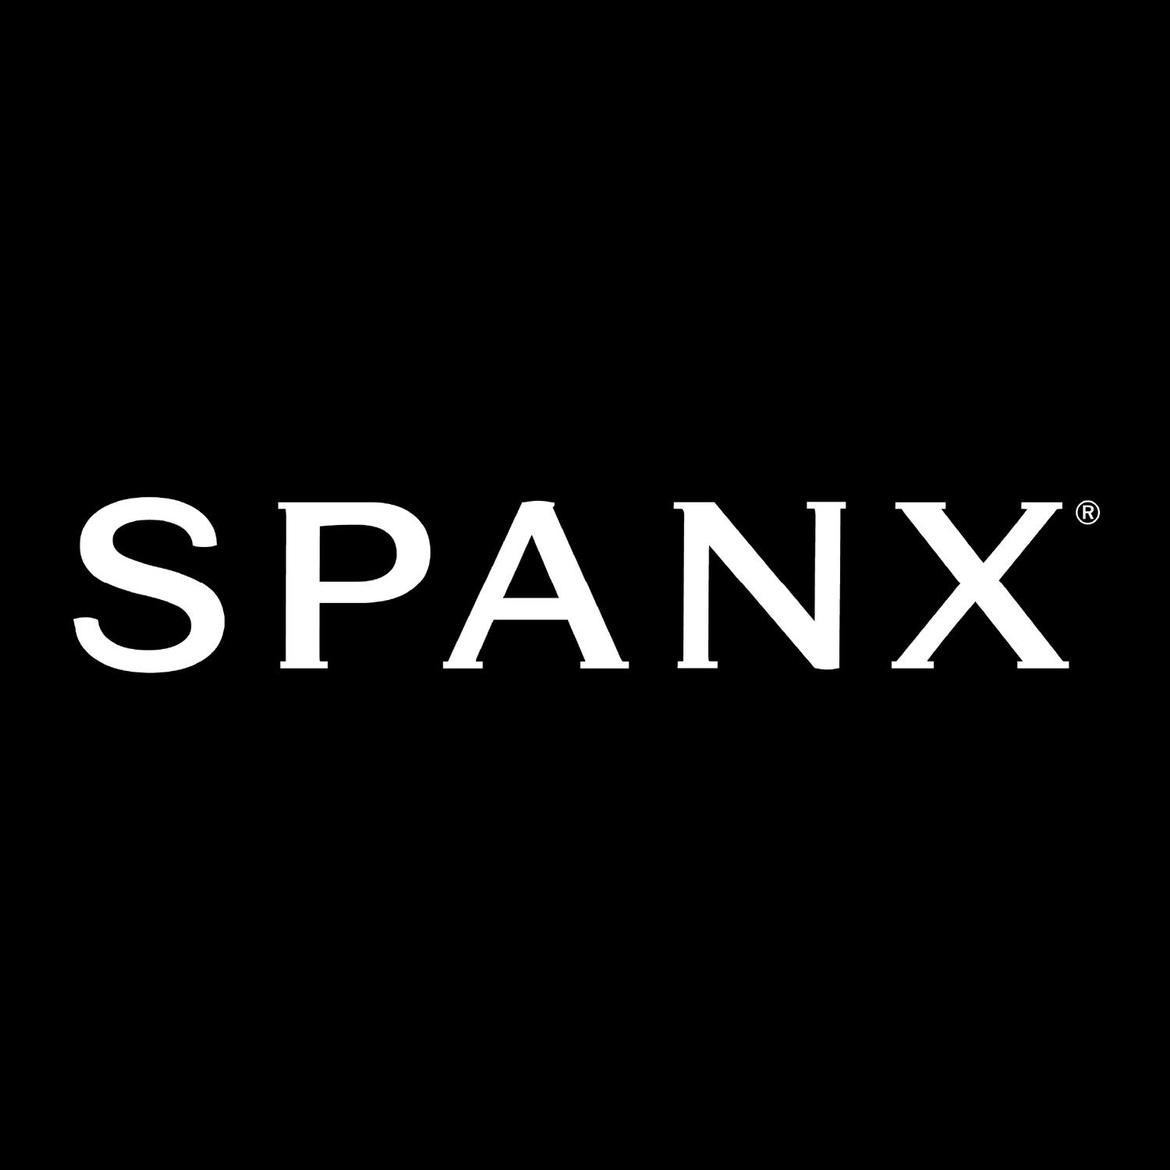 SPANX's images